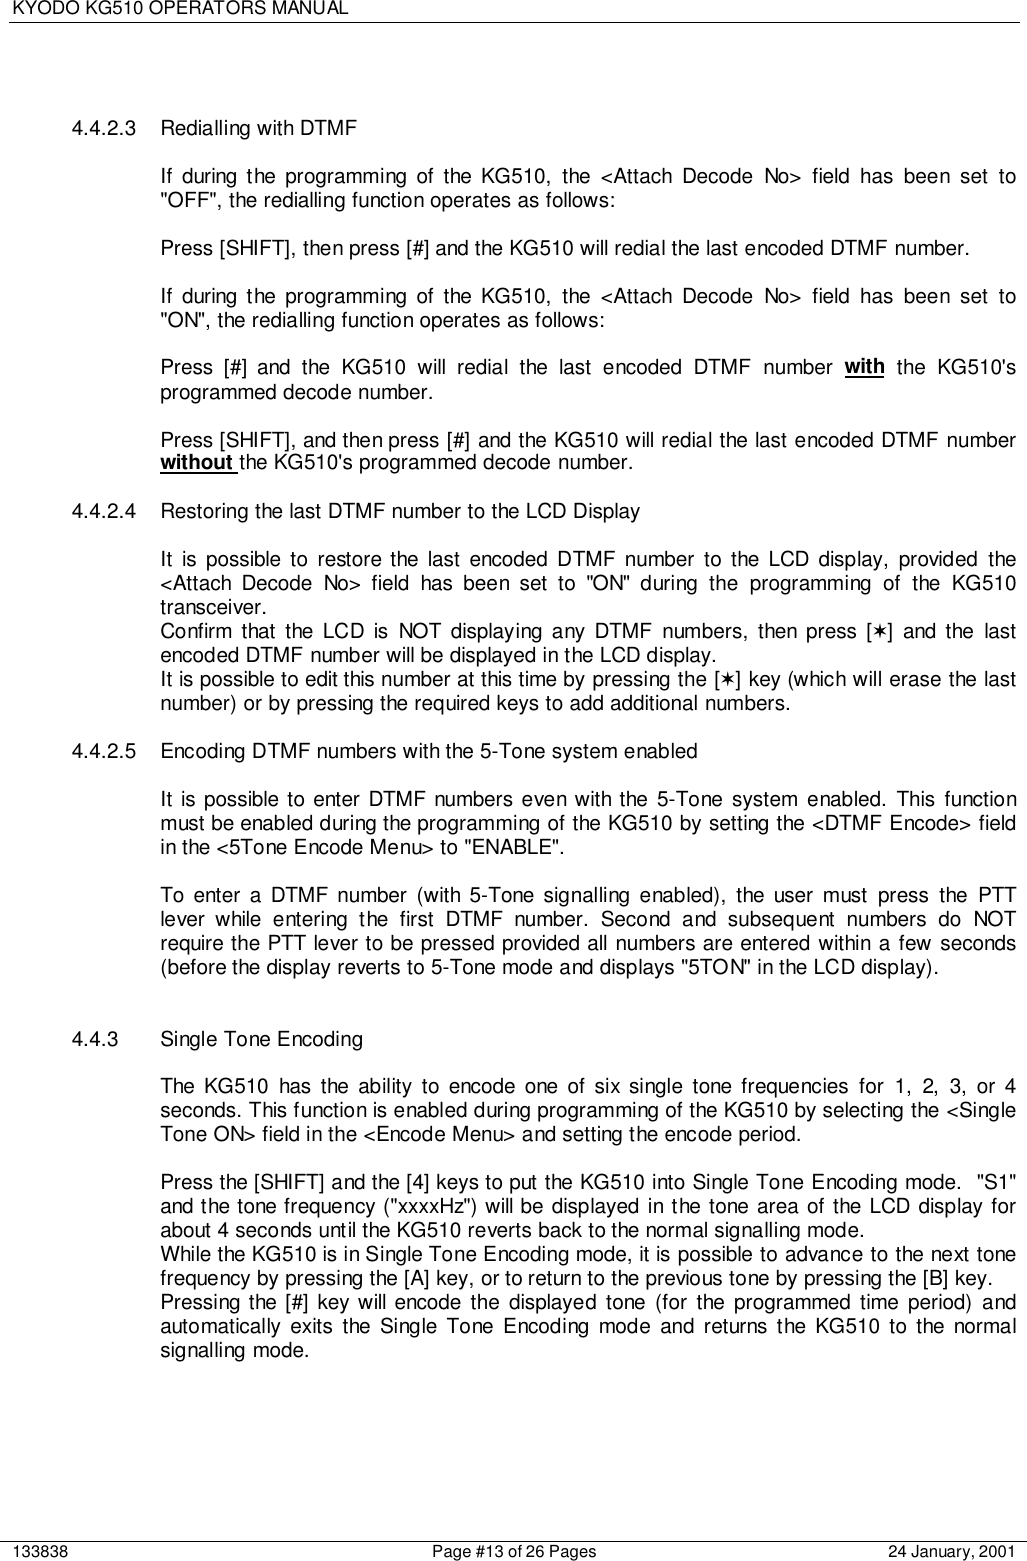 KYODO KG510 OPERATORS MANUAL133838 Page #13 of 26 Pages 24 January, 20014.4.2.3  Redialling with DTMFIf during the programming of the KG510, the &lt;Attach Decode No&gt; field has been set to&quot;OFF&quot;, the redialling function operates as follows:Press [SHIFT], then press [#] and the KG510 will redial the last encoded DTMF number.If during the programming of the KG510, the &lt;Attach Decode No&gt; field has been set to&quot;ON&quot;, the redialling function operates as follows:Press [#] and the KG510 will redial the last encoded DTMF number with the KG510&apos;sprogrammed decode number.Press [SHIFT], and then press [#] and the KG510 will redial the last encoded DTMF numberwithout the KG510&apos;s programmed decode number.4.4.2.4  Restoring the last DTMF number to the LCD DisplayIt is possible to restore the last encoded DTMF number to the LCD display, provided the&lt;Attach Decode No&gt; field has been set to &quot;ON&quot; during the programming of the KG510transceiver.Confirm that the LCD is NOT displaying any DTMF numbers, then press [✶] and the lastencoded DTMF number will be displayed in the LCD display.It is possible to edit this number at this time by pressing the [✶] key (which will erase the lastnumber) or by pressing the required keys to add additional numbers.4.4.2.5 Encoding DTMF numbers with the 5-Tone system enabledIt is possible to enter DTMF numbers even with the 5-Tone system enabled. This functionmust be enabled during the programming of the KG510 by setting the &lt;DTMF Encode&gt; fieldin the &lt;5Tone Encode Menu&gt; to &quot;ENABLE&quot;.To enter a DTMF number (with 5-Tone signalling enabled), the user must press the PTTlever while entering the first DTMF number. Second and subsequent numbers do NOTrequire the PTT lever to be pressed provided all numbers are entered within a few seconds(before the display reverts to 5-Tone mode and displays &quot;5TON&quot; in the LCD display).4.4.3 Single Tone EncodingThe KG510 has the ability to encode one of six single tone frequencies for 1, 2, 3, or 4seconds. This function is enabled during programming of the KG510 by selecting the &lt;SingleTone ON&gt; field in the &lt;Encode Menu&gt; and setting the encode period.Press the [SHIFT] and the [4] keys to put the KG510 into Single Tone Encoding mode.  &quot;S1&quot;and the tone frequency (&quot;xxxxHz&quot;) will be displayed in the tone area of the LCD display forabout 4 seconds until the KG510 reverts back to the normal signalling mode.While the KG510 is in Single Tone Encoding mode, it is possible to advance to the next tonefrequency by pressing the [A] key, or to return to the previous tone by pressing the [B] key.Pressing the [#] key will encode the displayed tone (for the programmed time period) andautomatically exits the Single Tone Encoding mode and returns the KG510 to the normalsignalling mode.